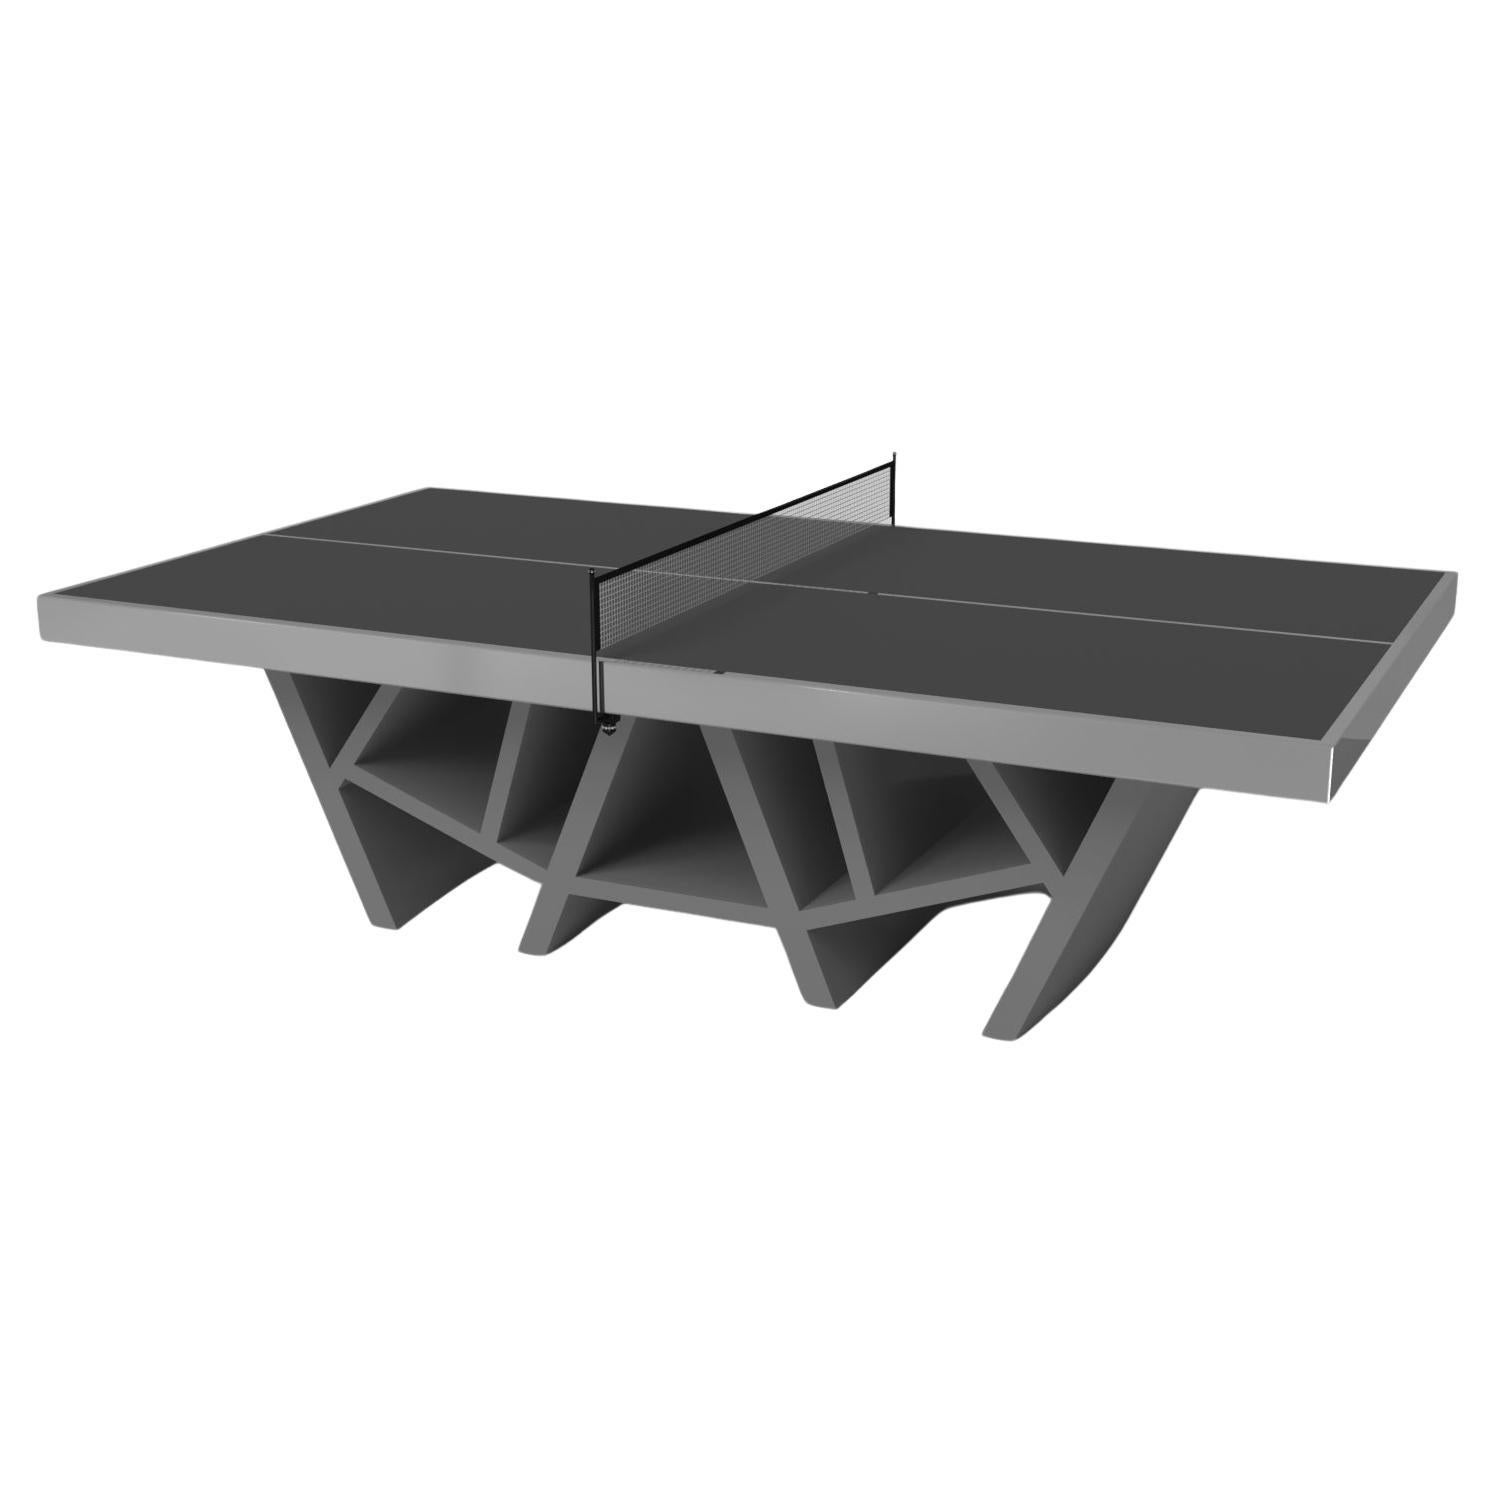 Elevate Customs Maze Tennis Table /Stainless Steel Sheet Metal in 9'-Made in USA For Sale